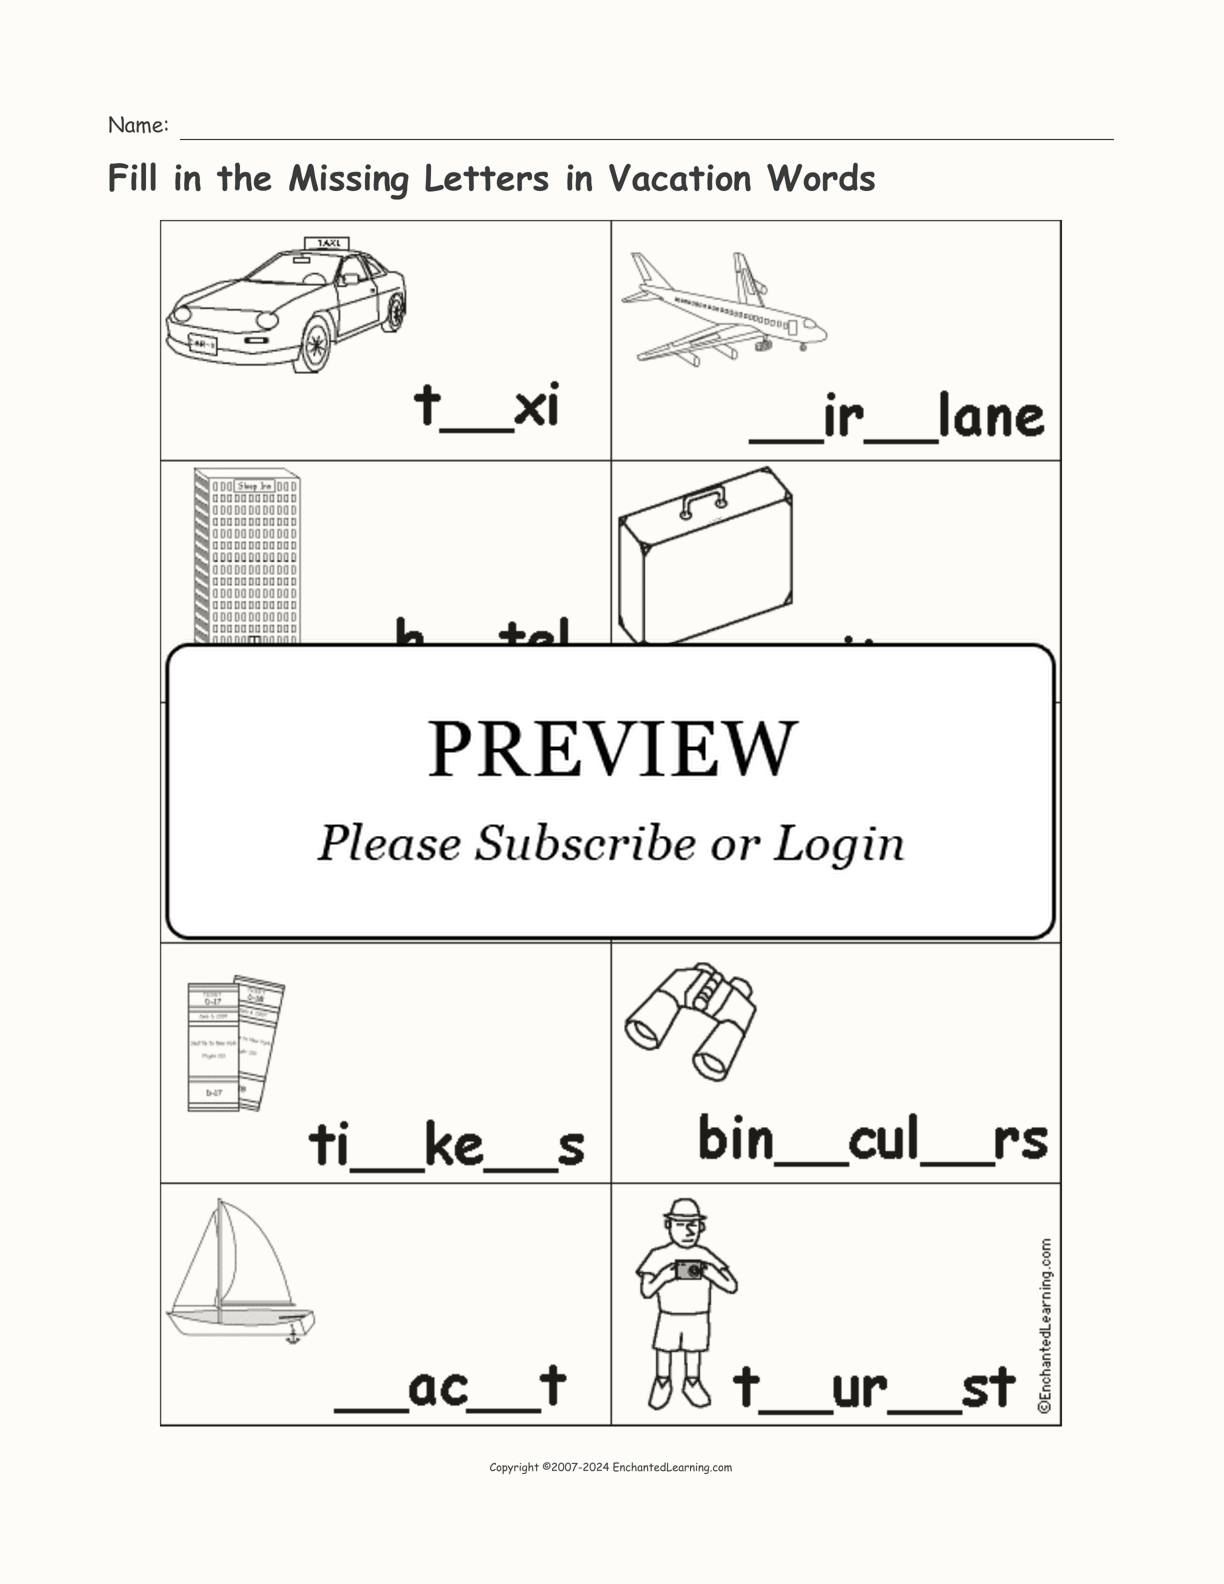 Fill in the Missing Letters in Vacation Words interactive worksheet page 1